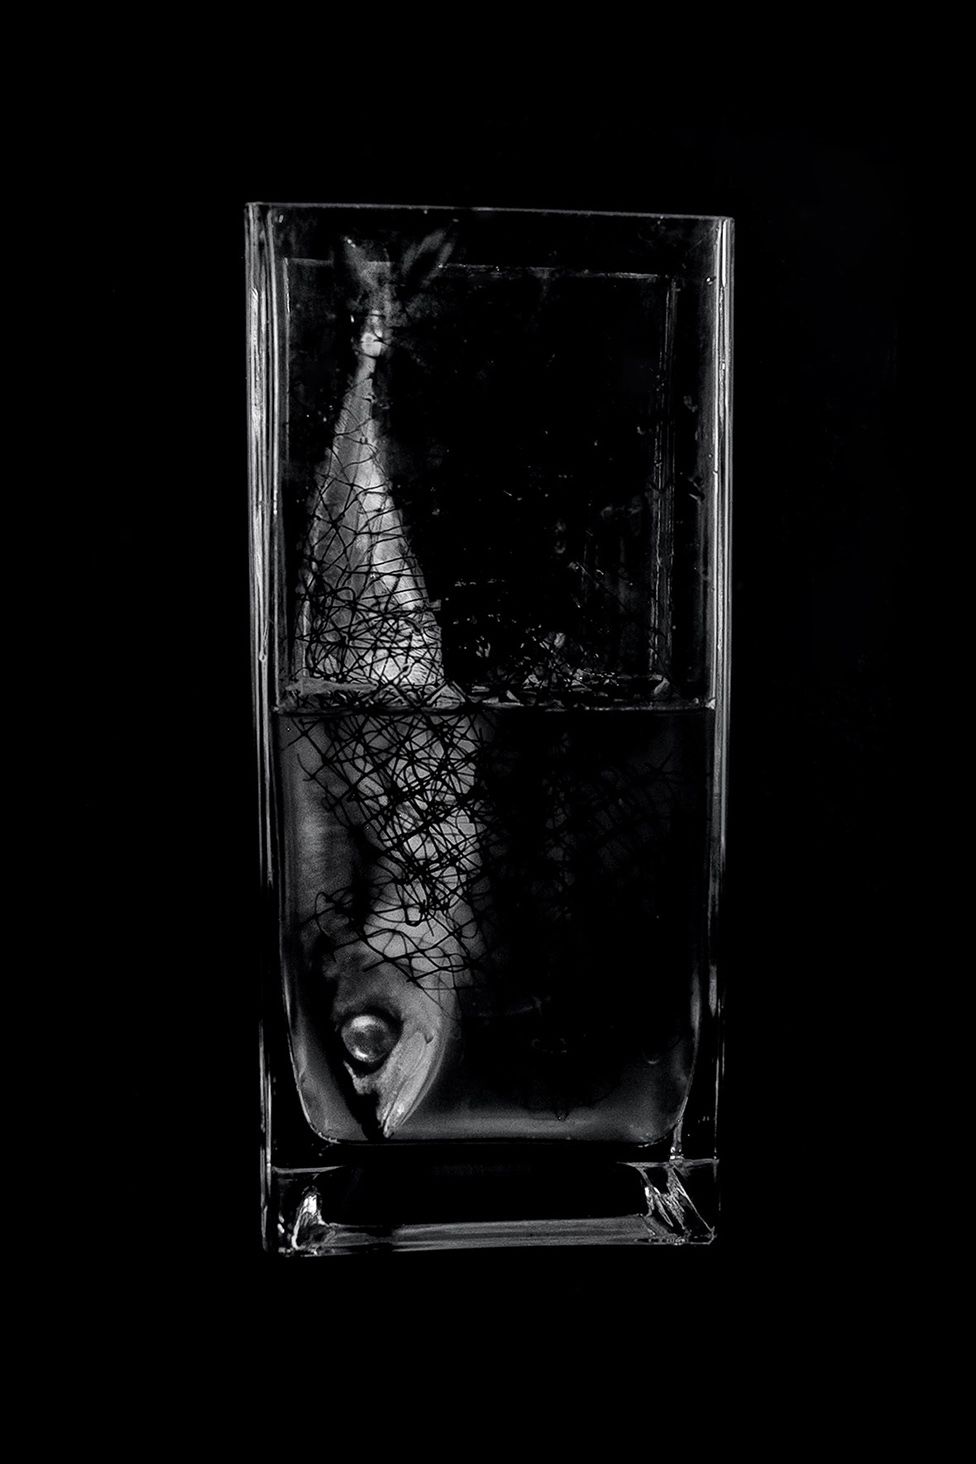 A shot of a fish in a glass of water